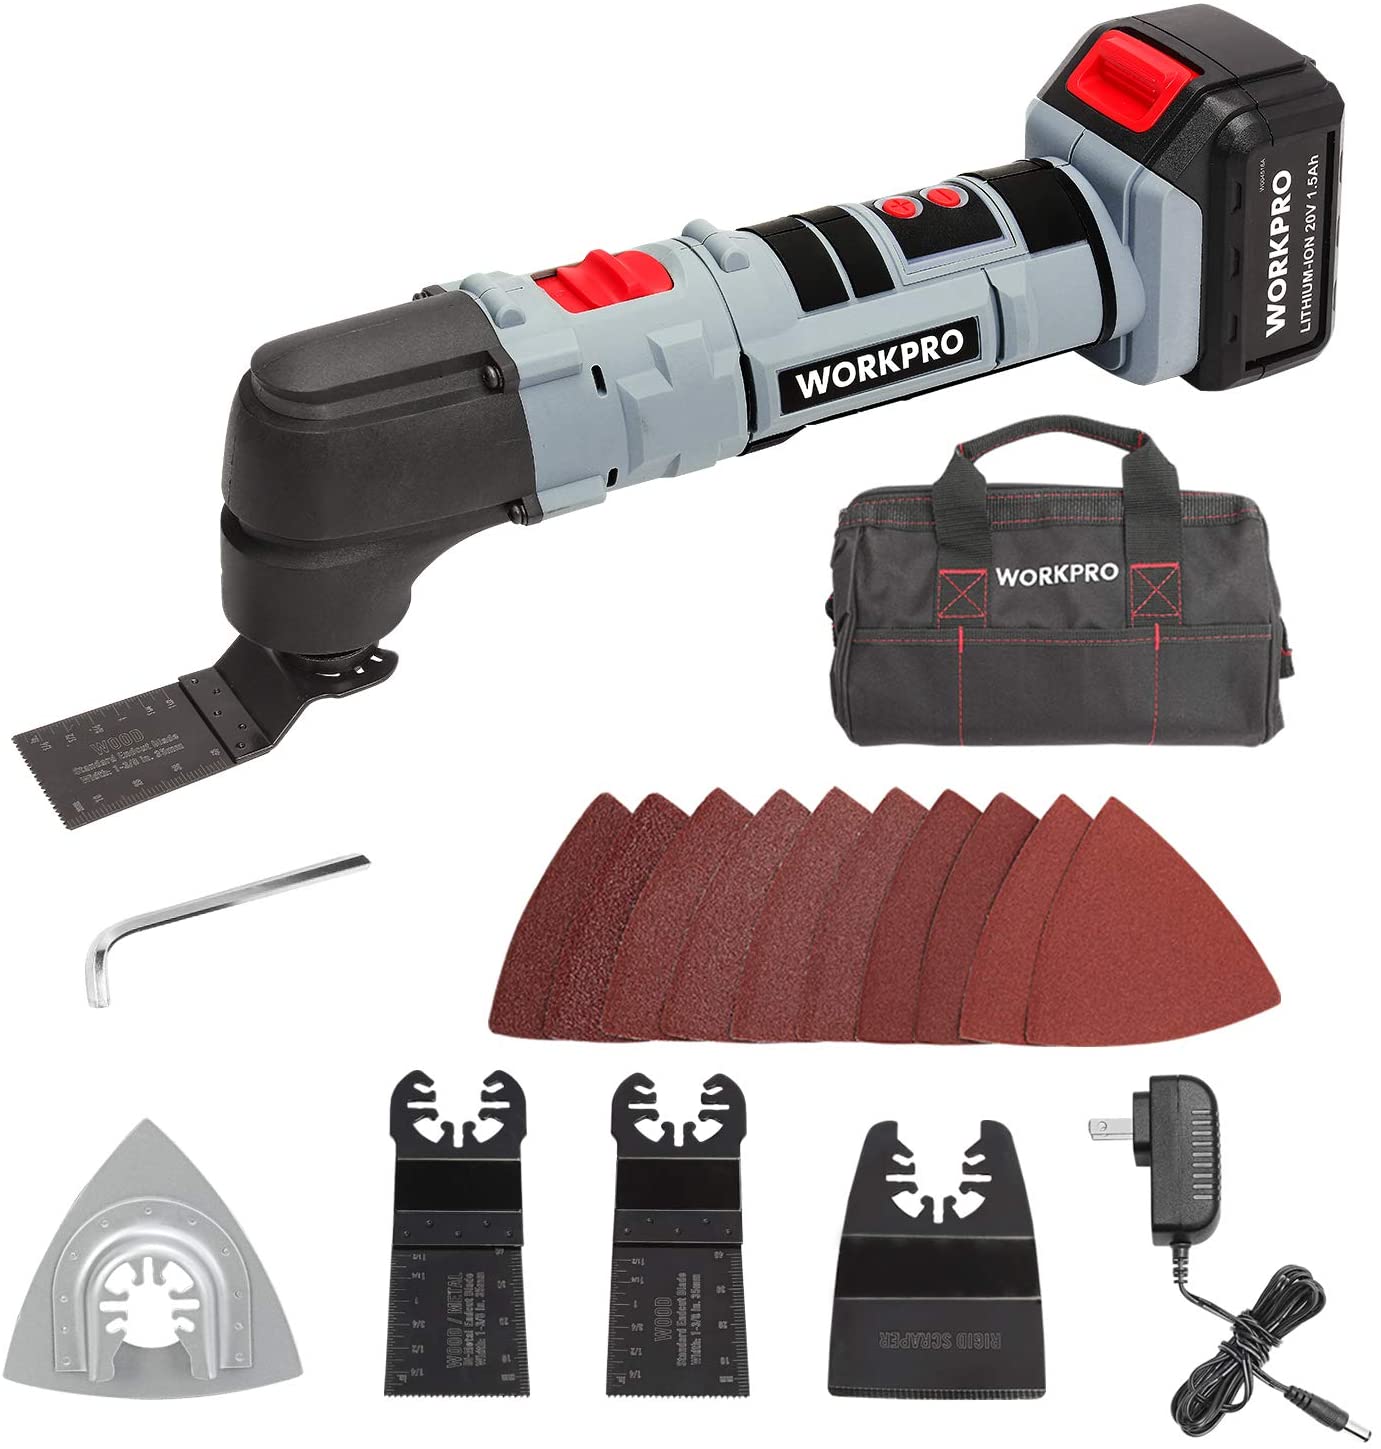 WORKPRO 20V Lithium-Ion Cordless & LED Variable Speed Oscillating Multi-Tool